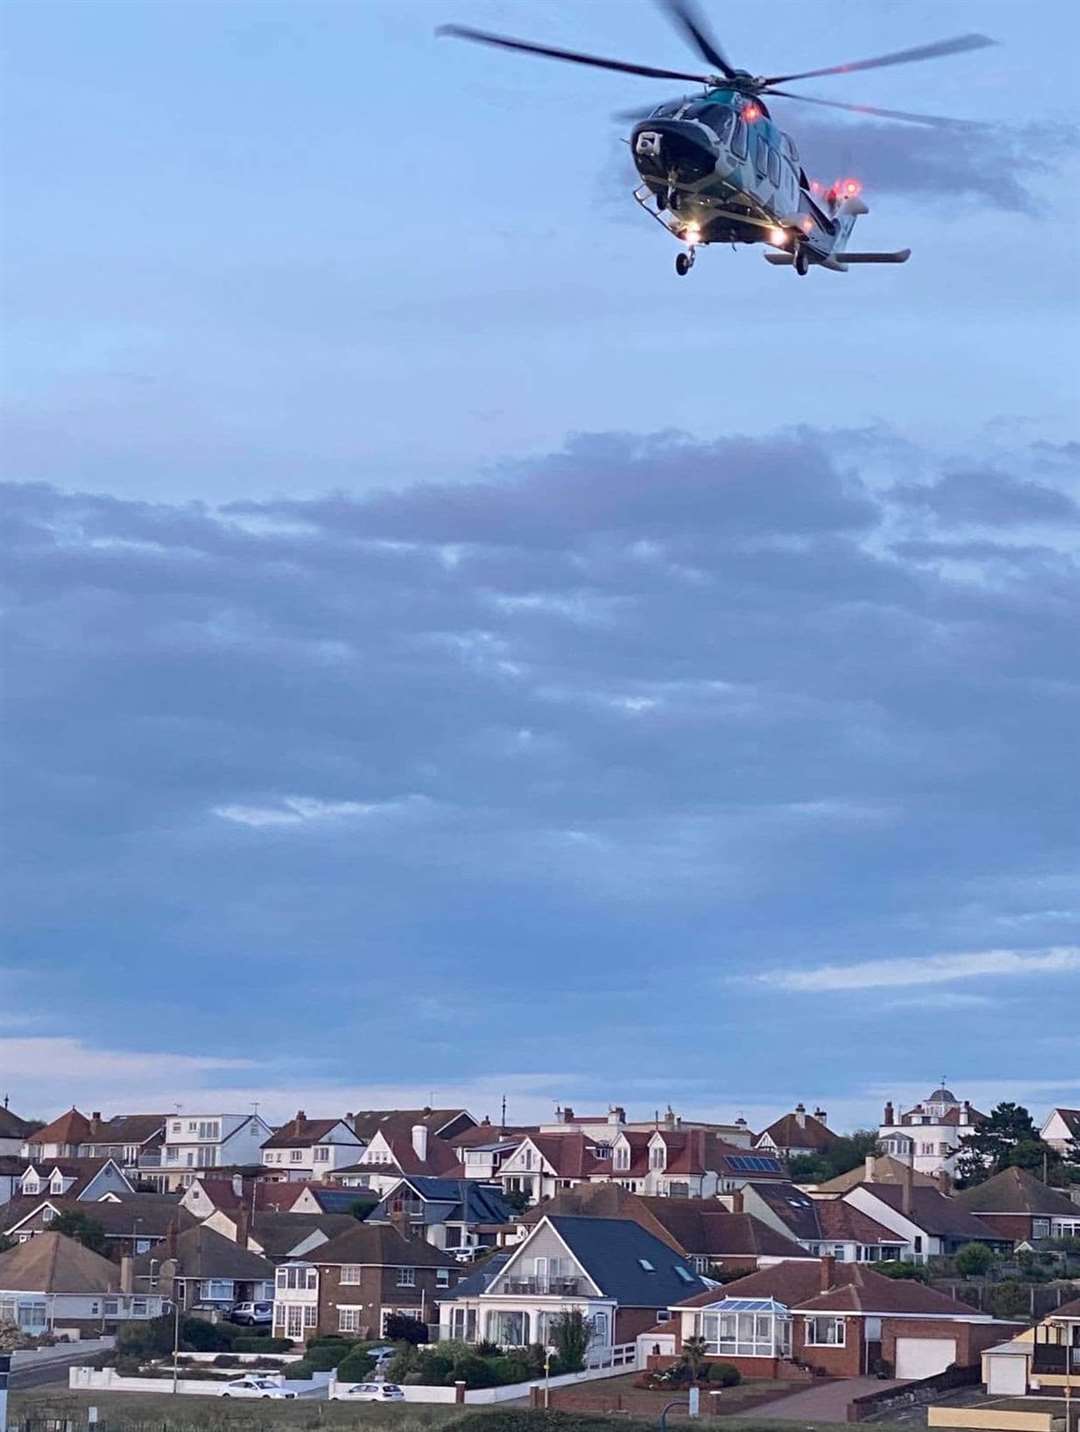 The air ambulance above Herne Bay